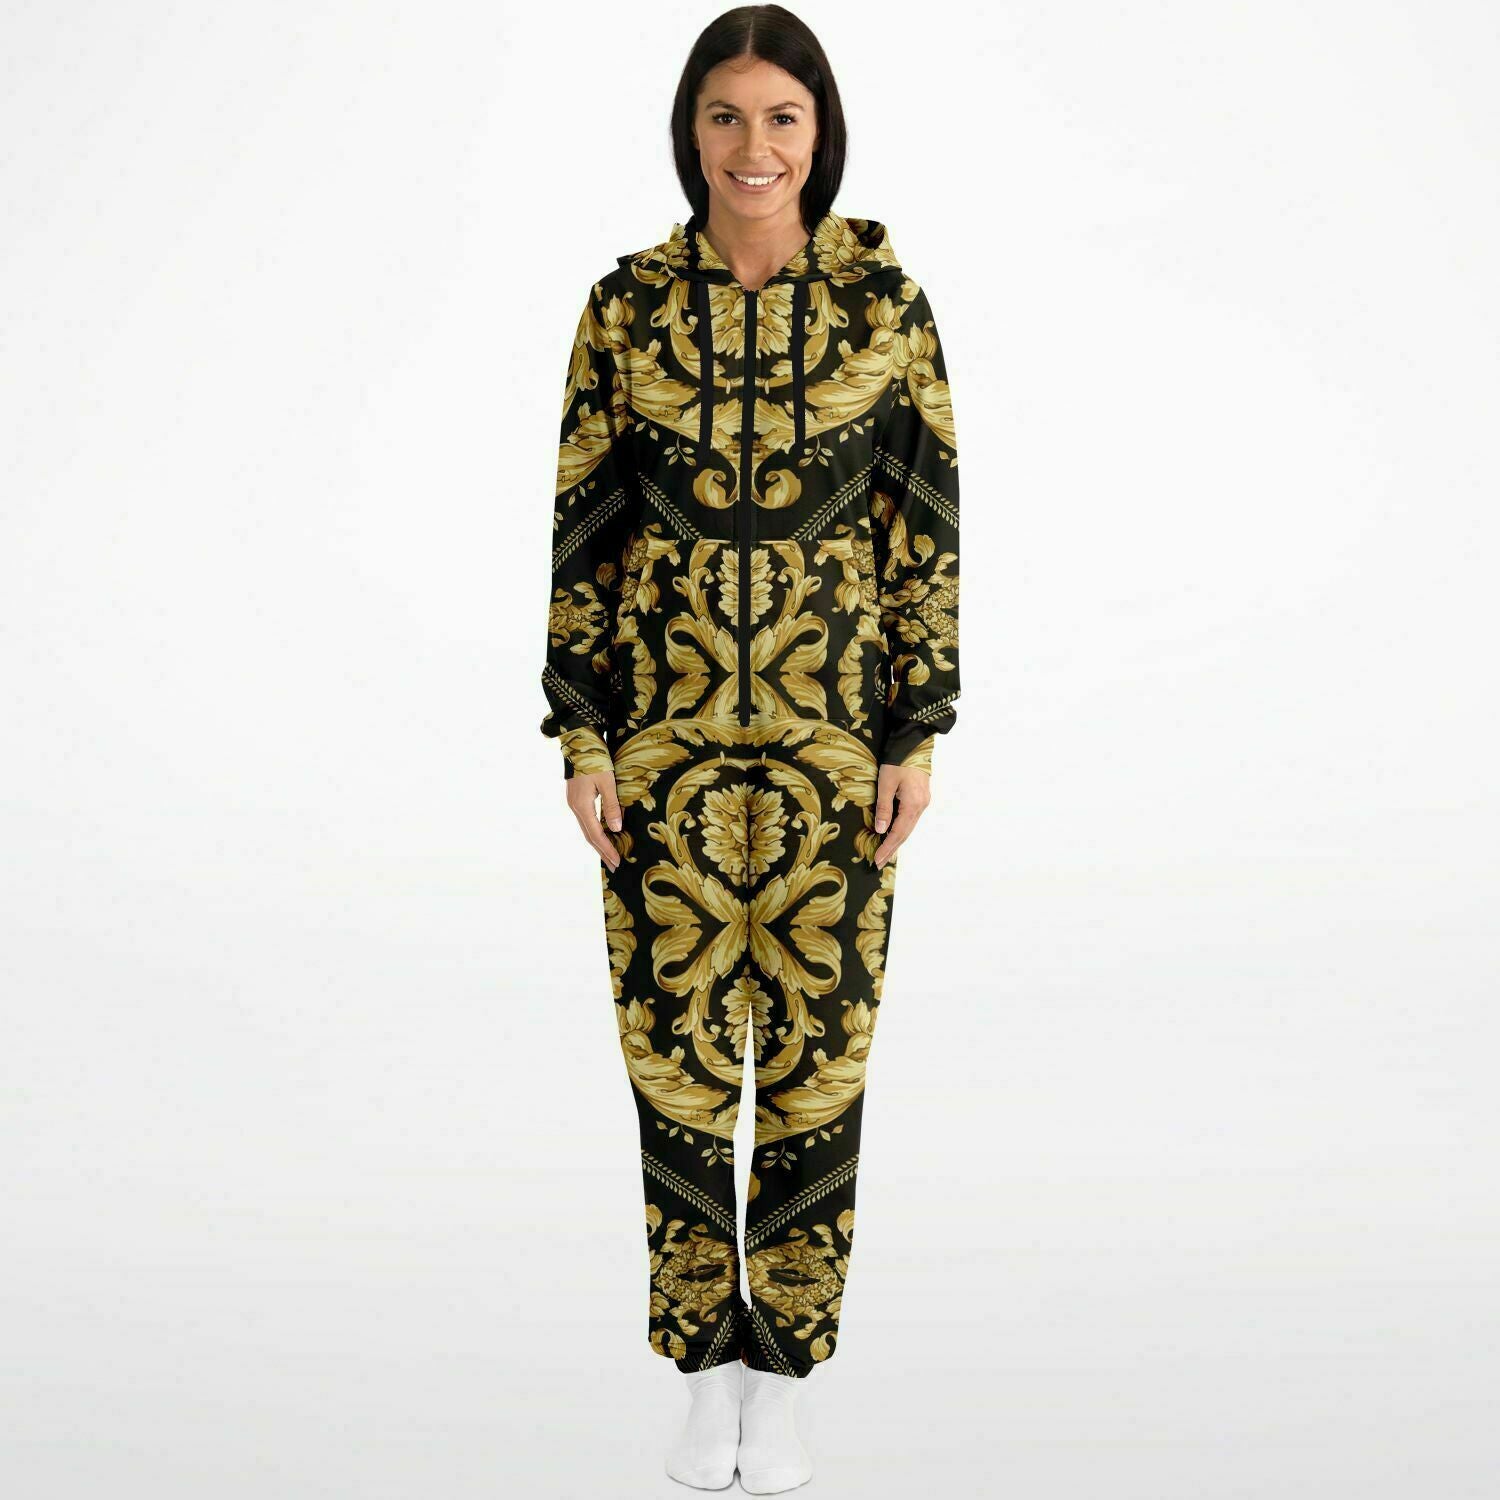 Baroque Gold and Black Scarf Print Unisex Onesie Jumpsuit - HipHatter